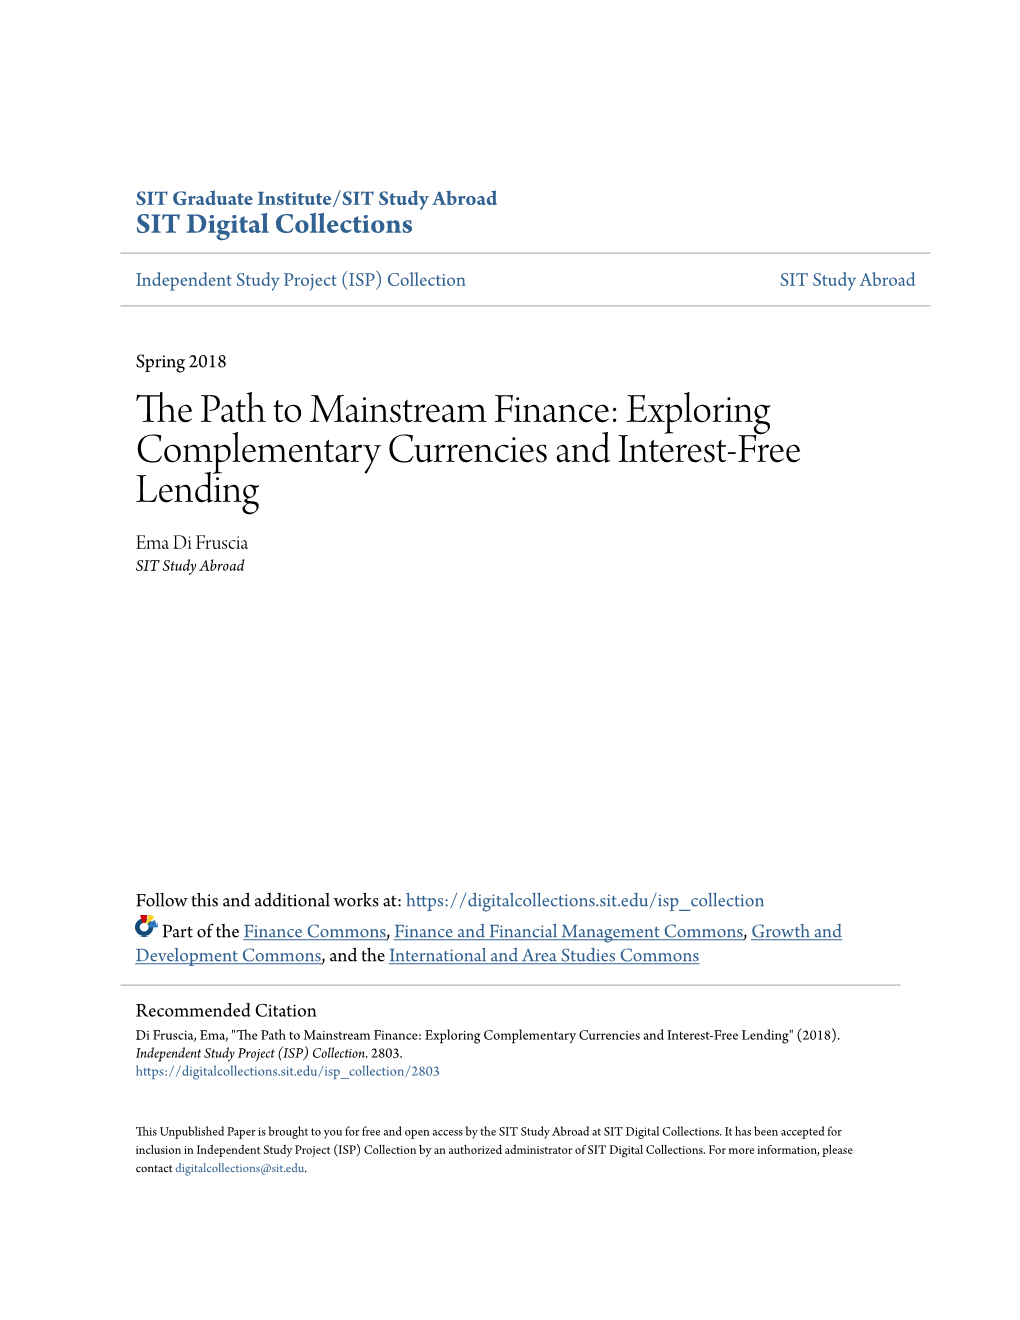 The Path to Mainstream Finance: Exploring Complementary